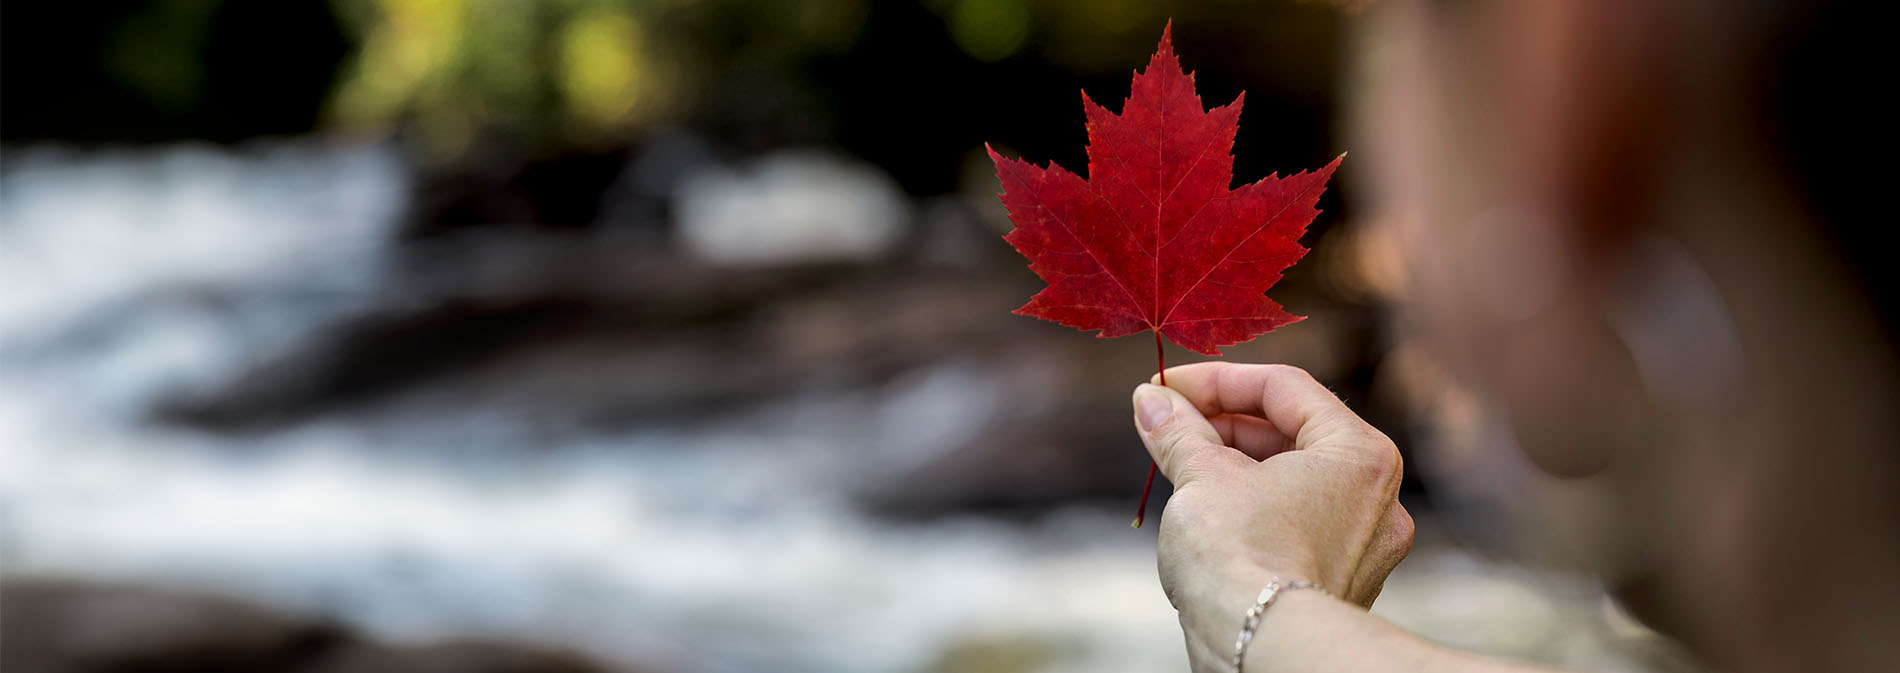 Woman's hand holding a maple leaf